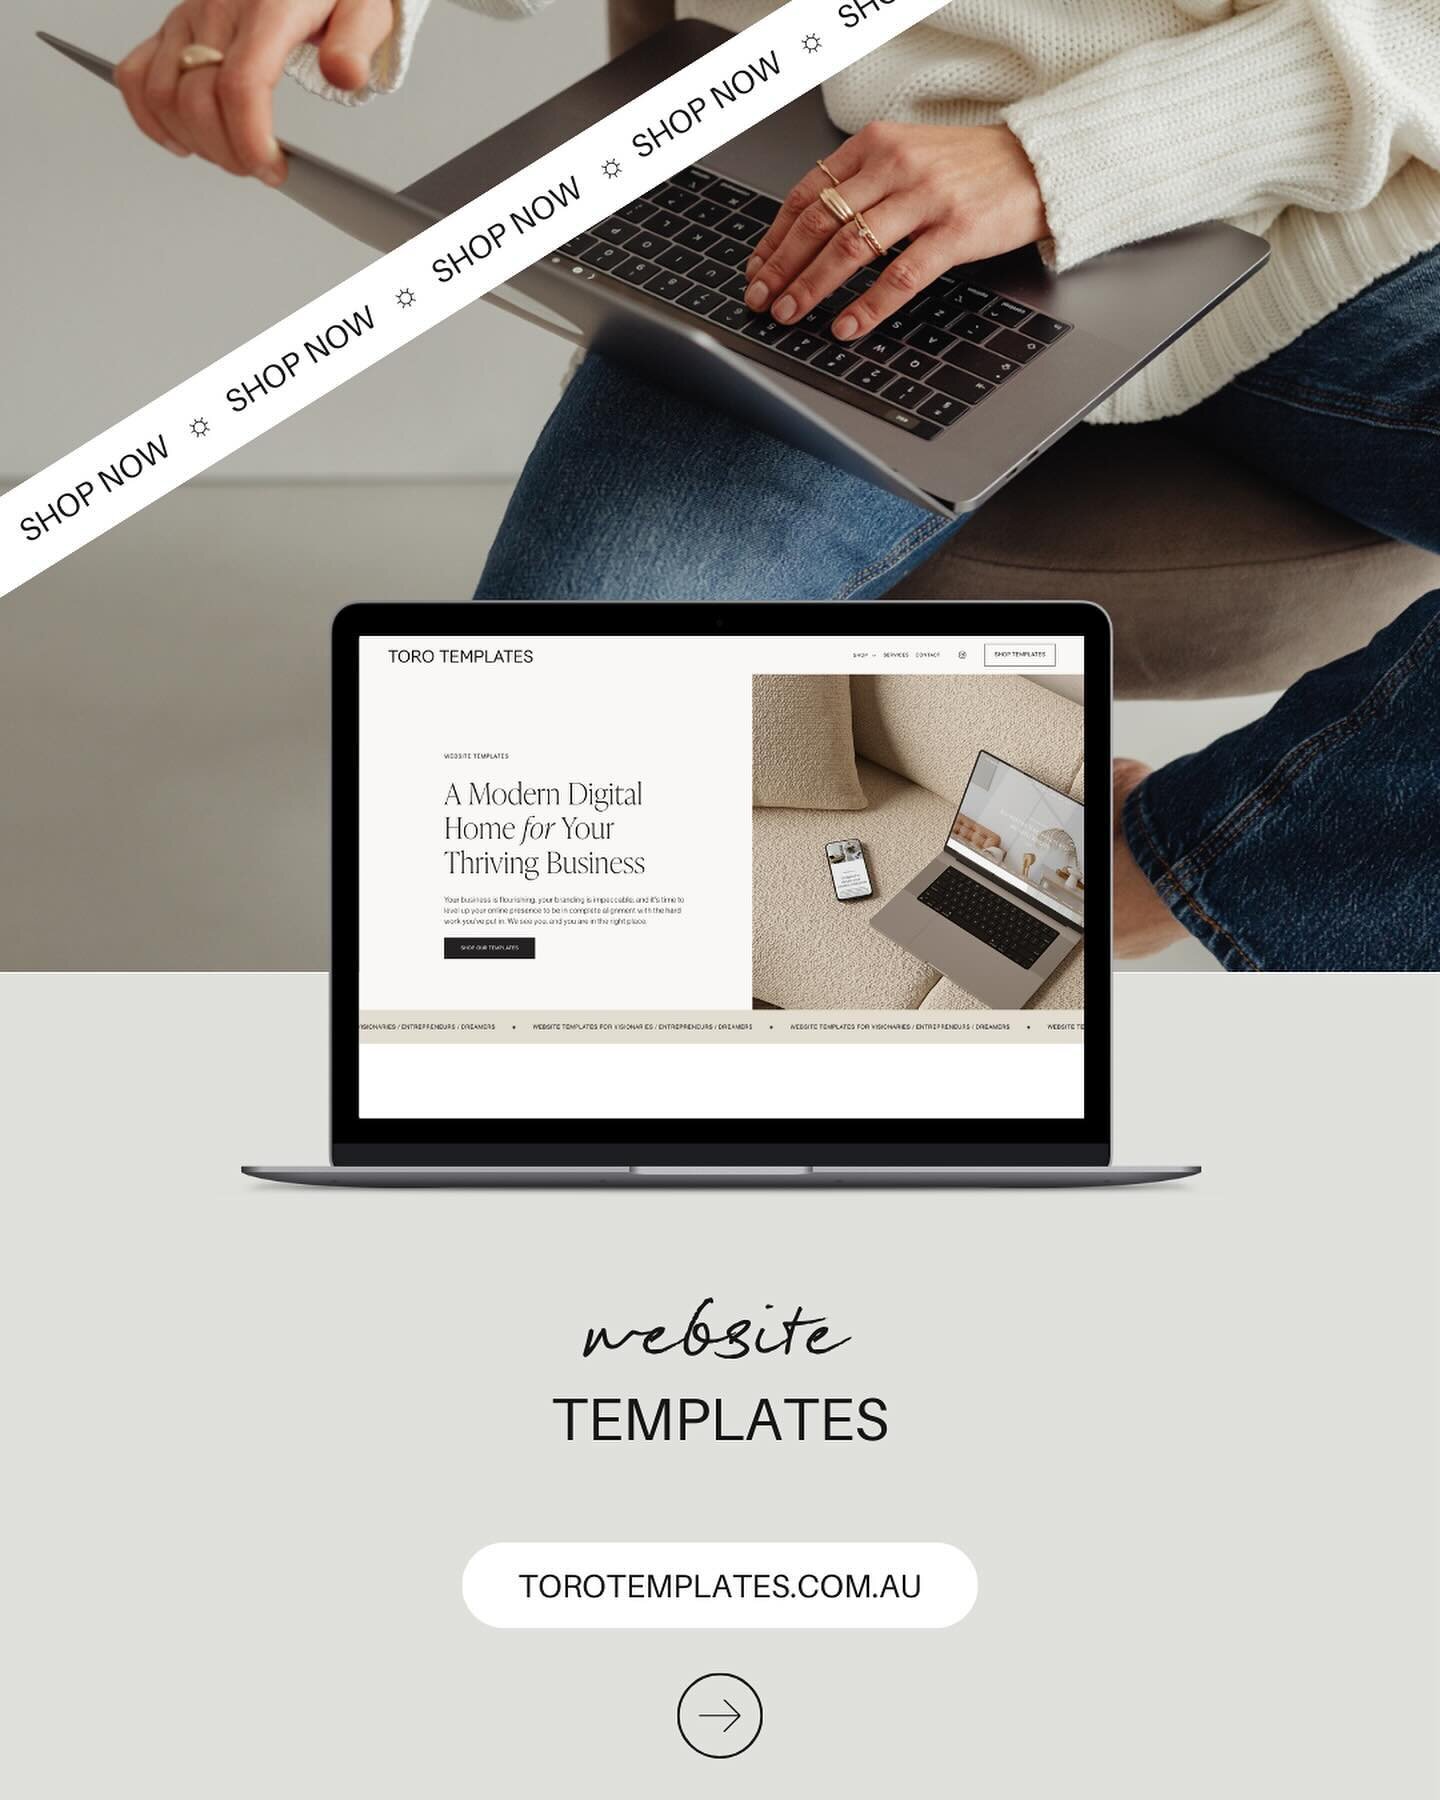 Today is the day - the launch of Toro Templates ✨

A lot of love and thought has gone into these templates to ensure you&rsquo;ve got the ✨best✨ done for you website.

All templates come with:
- A full video library on how to use &amp; update your si